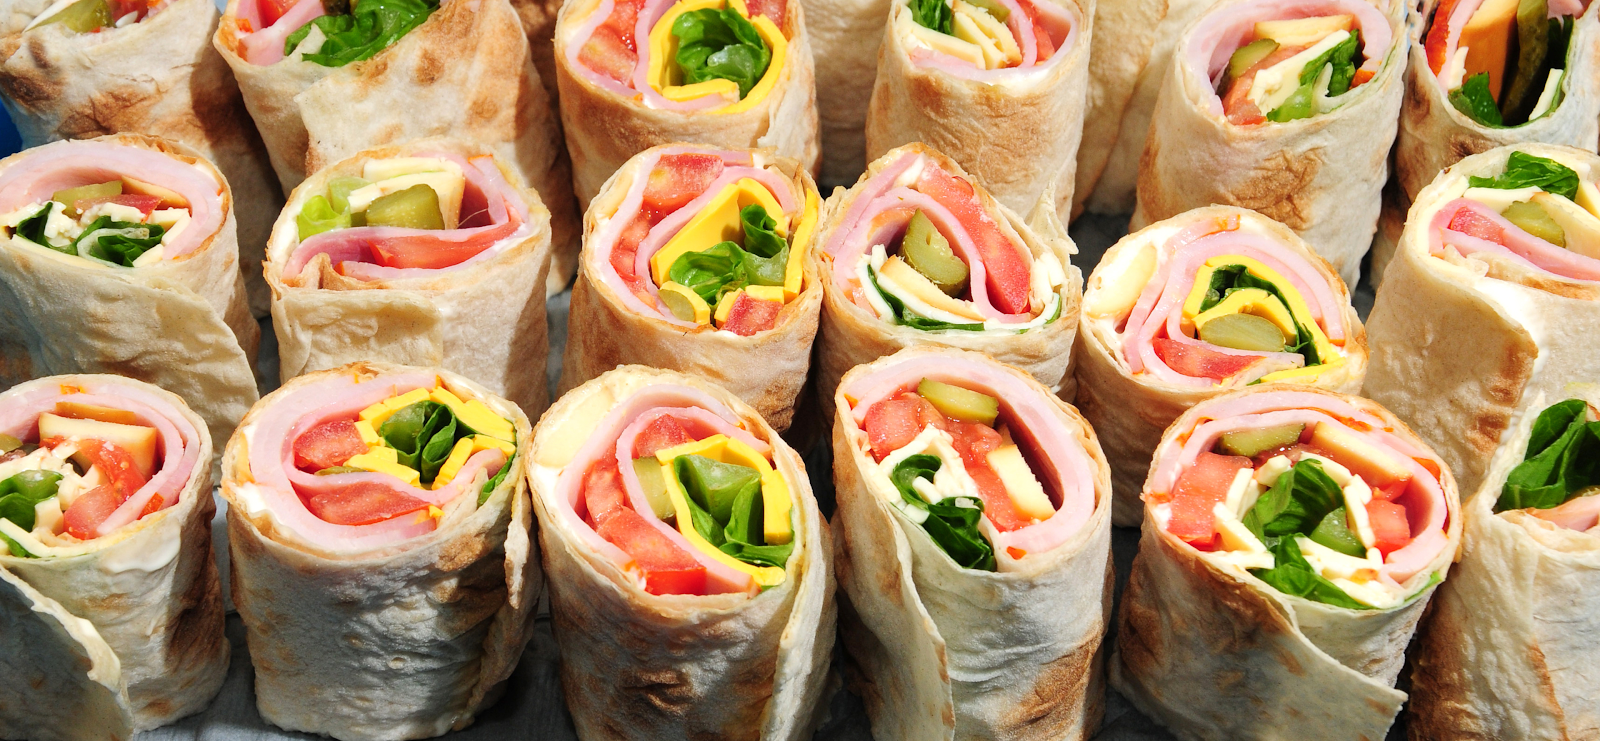 A delicious and easy-to-make sandwich wrap filled with fresh ingredients, perfect for easy camping meals for family